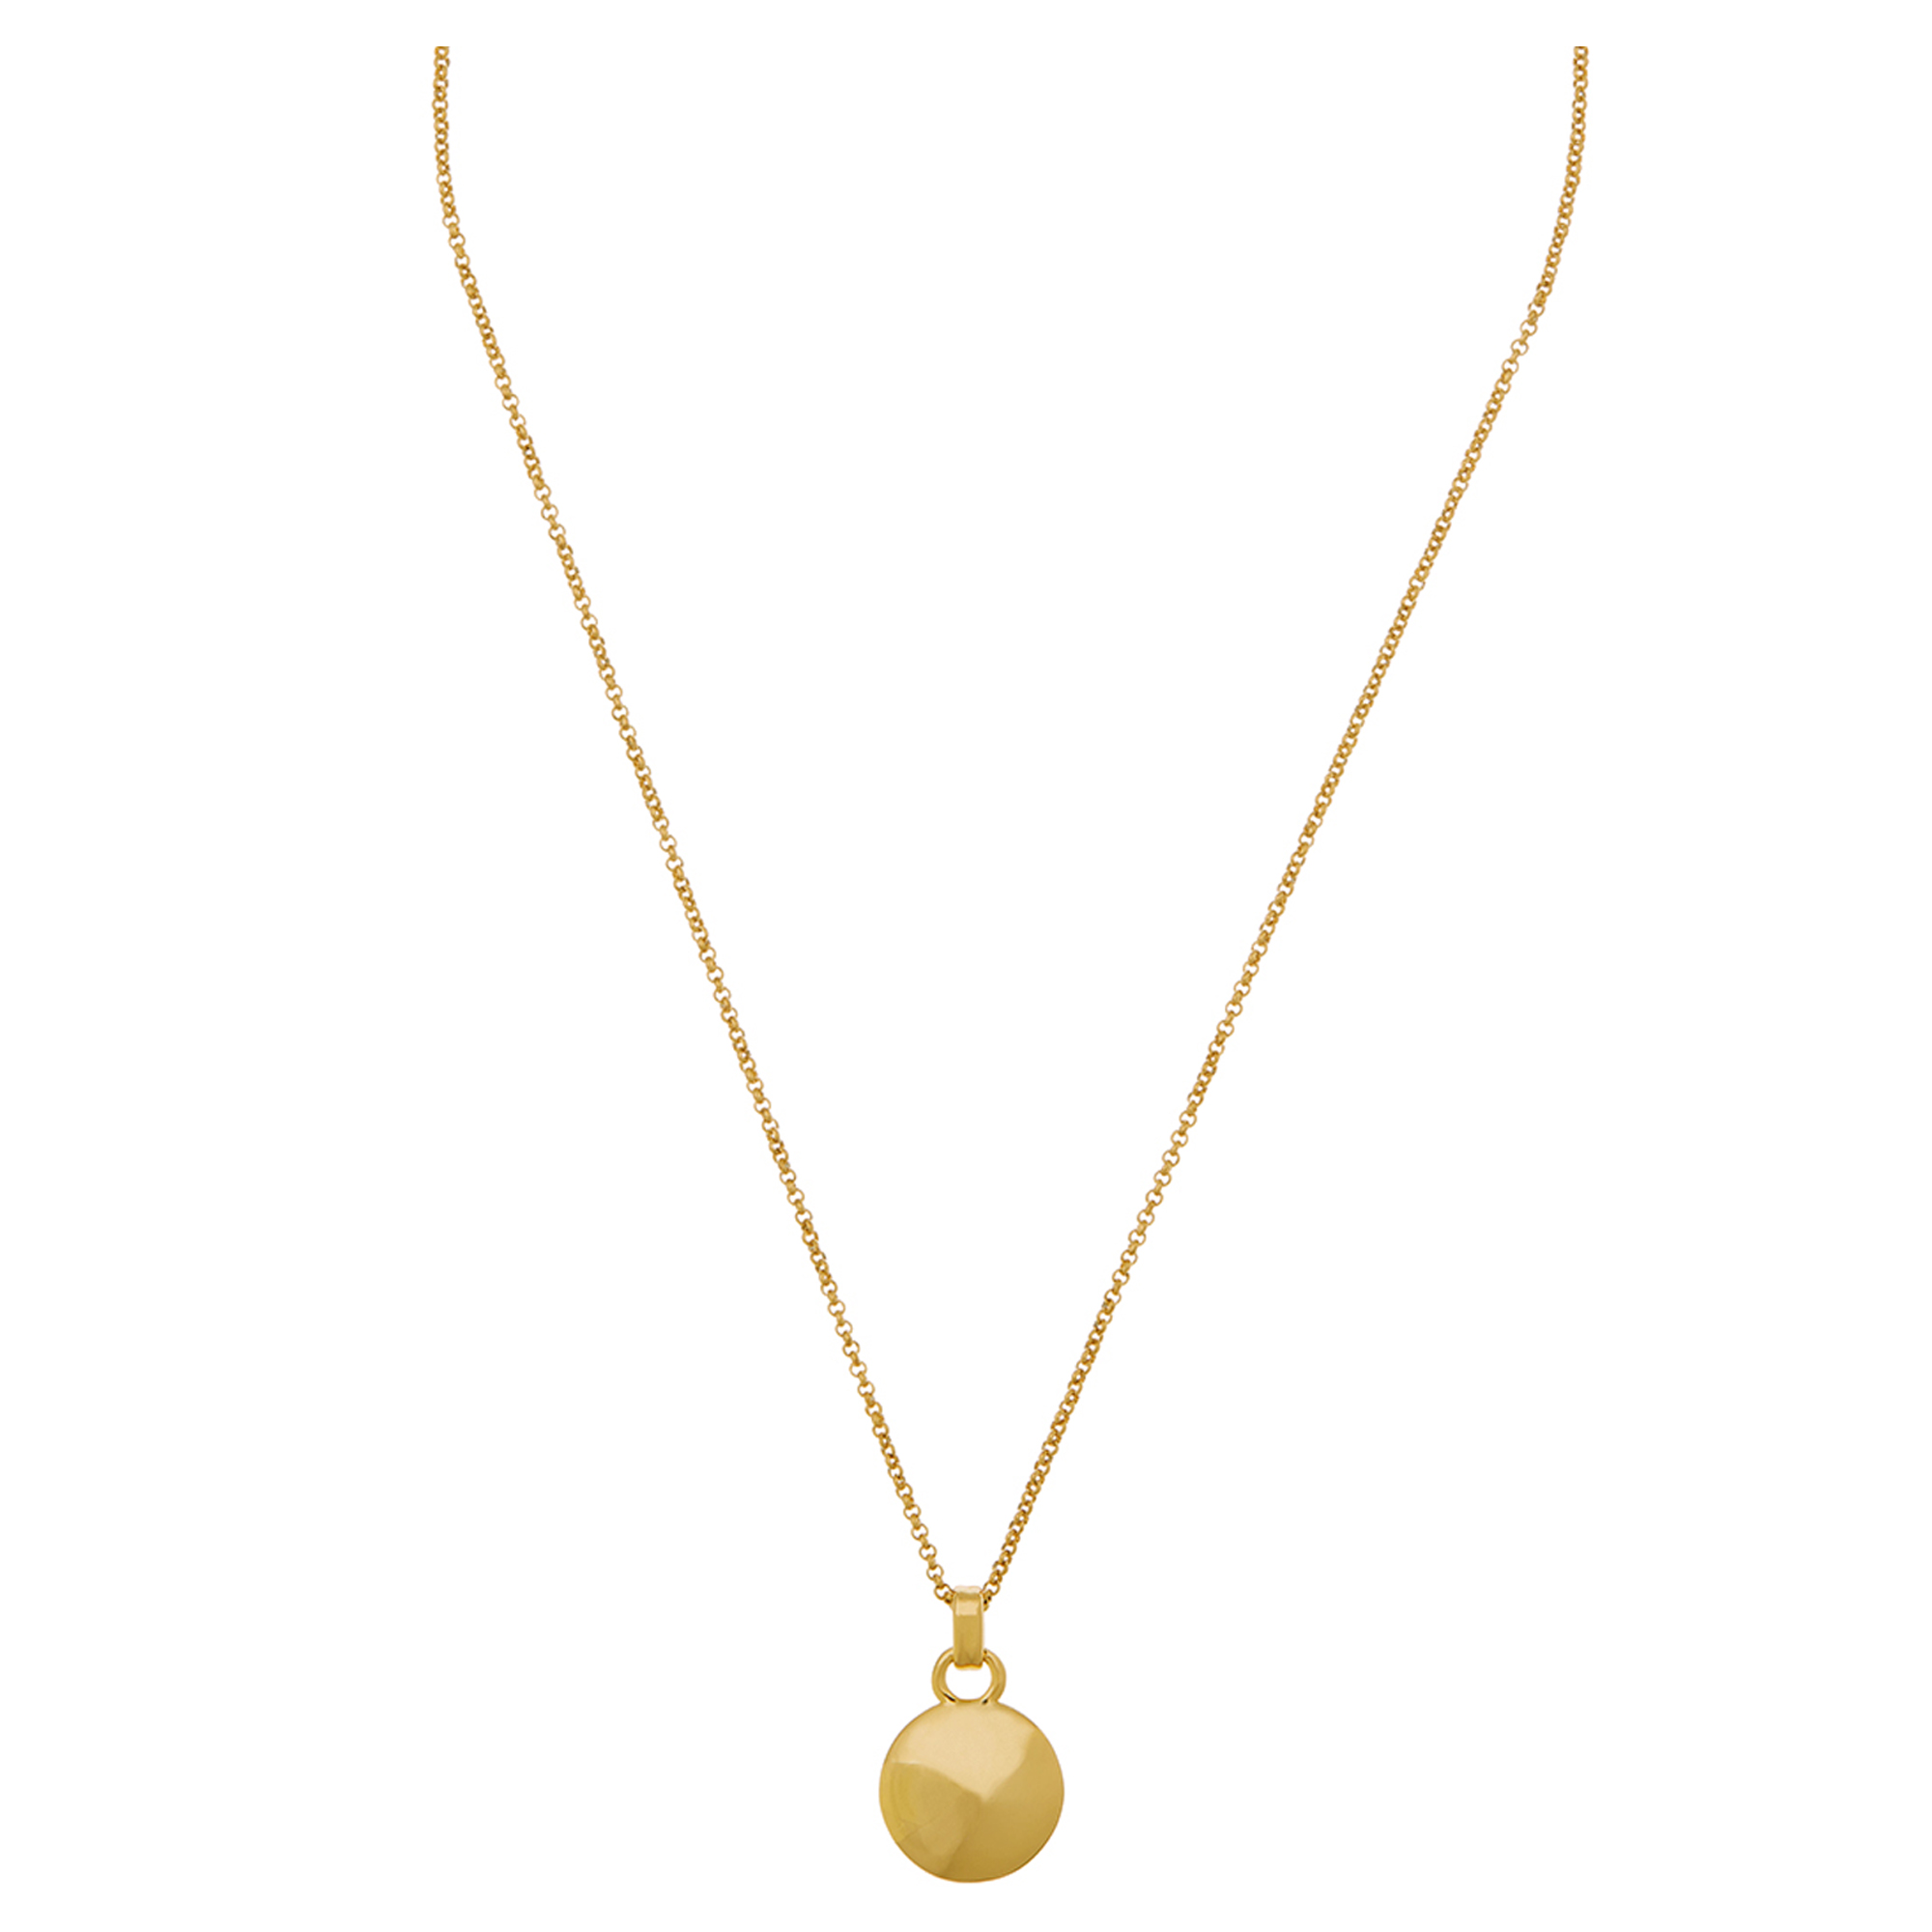 Circle of 5th's Diamond Disc Necklace by Elizabeth Moore | Made in NYC